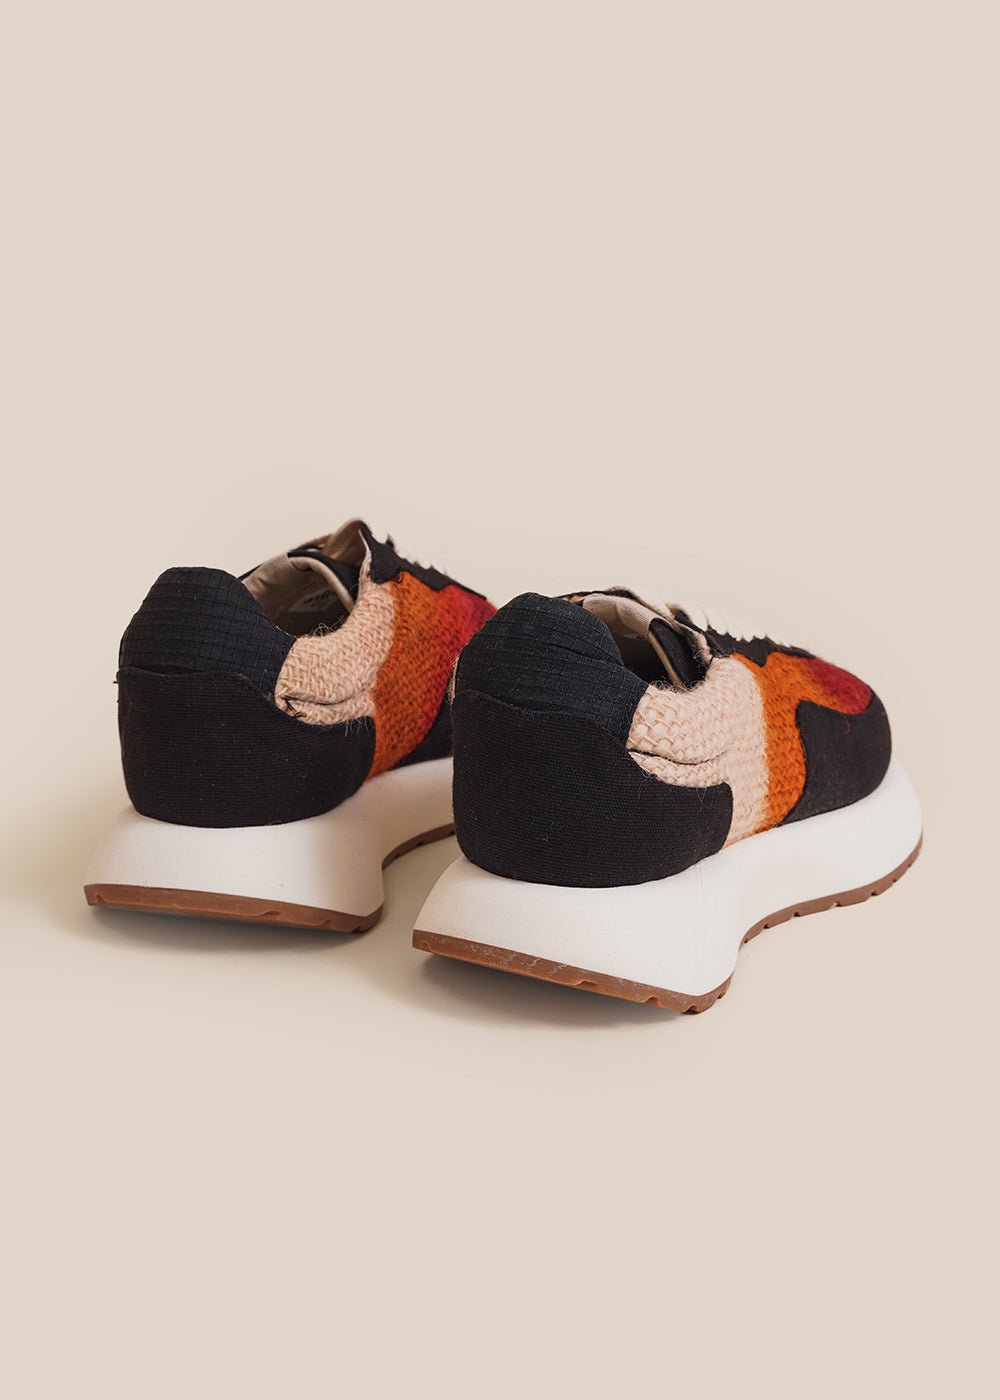 GOOD NEWS Ombre Kook Sneakers - New Classics Studios Sustainable Ethical Fashion Canada